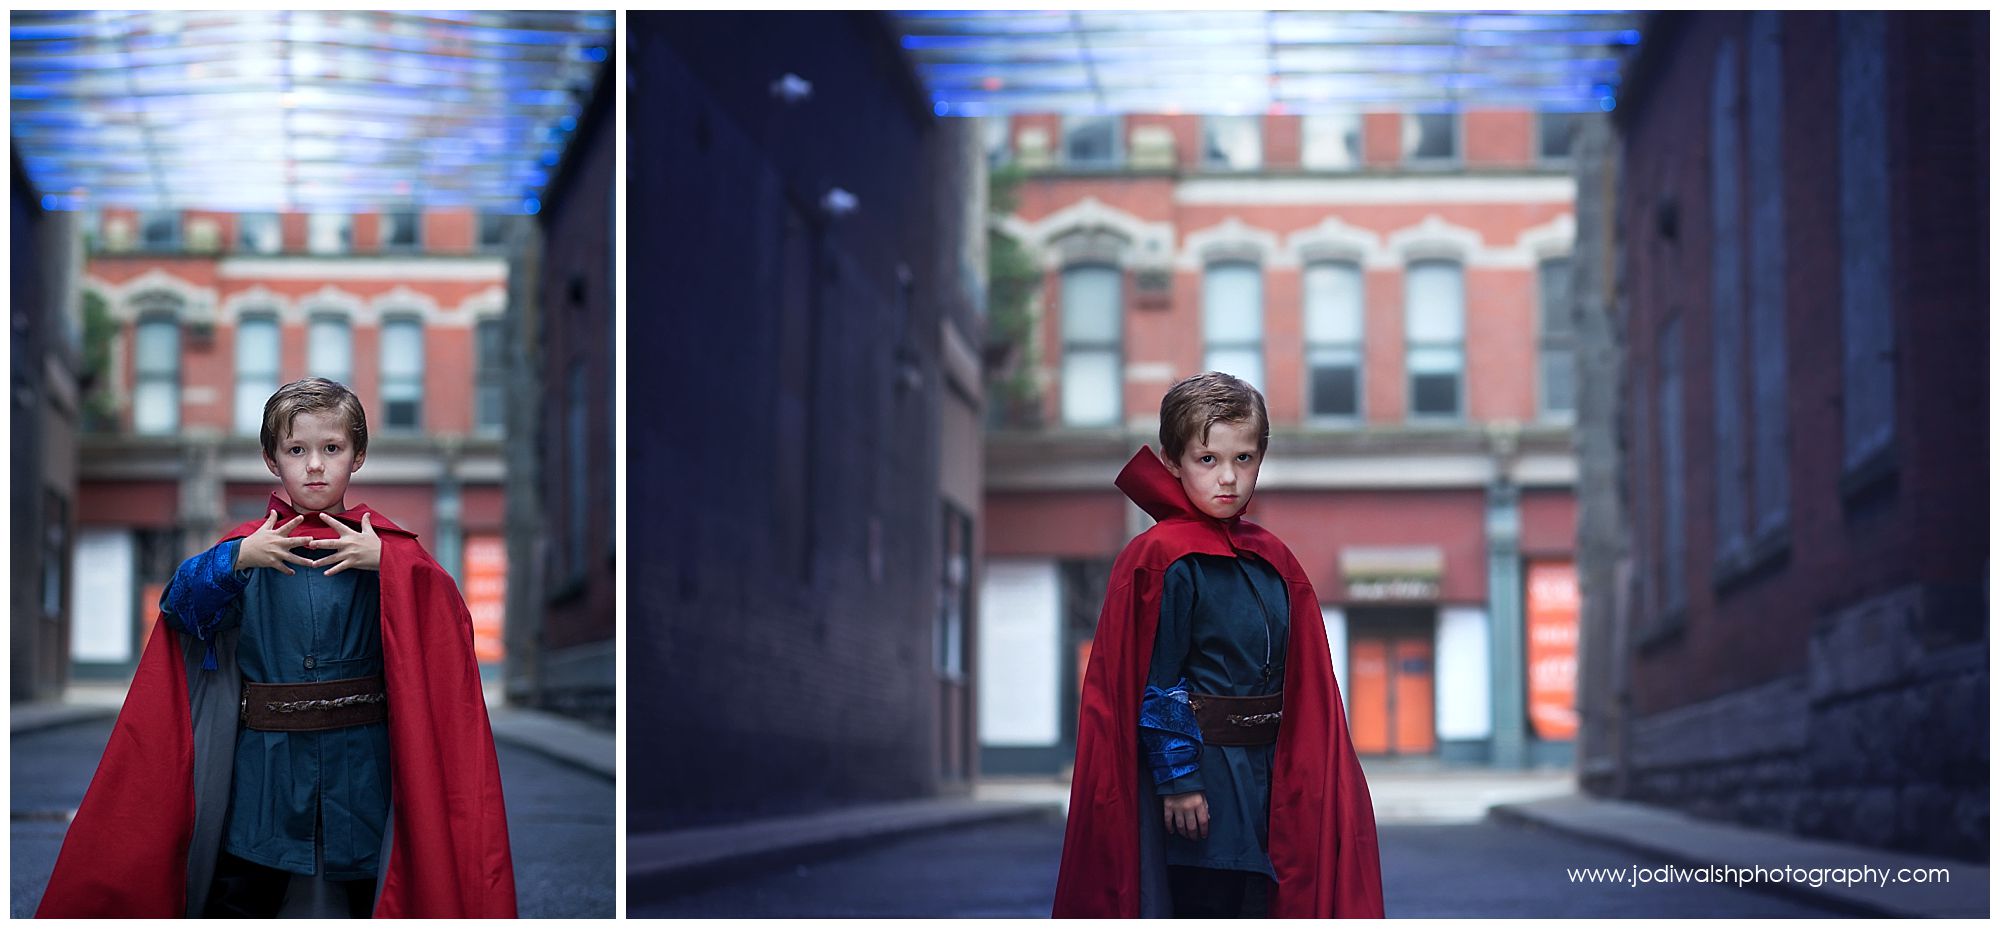 little boy in Dr. Strange inspired cosplay in Pittsburgh alley